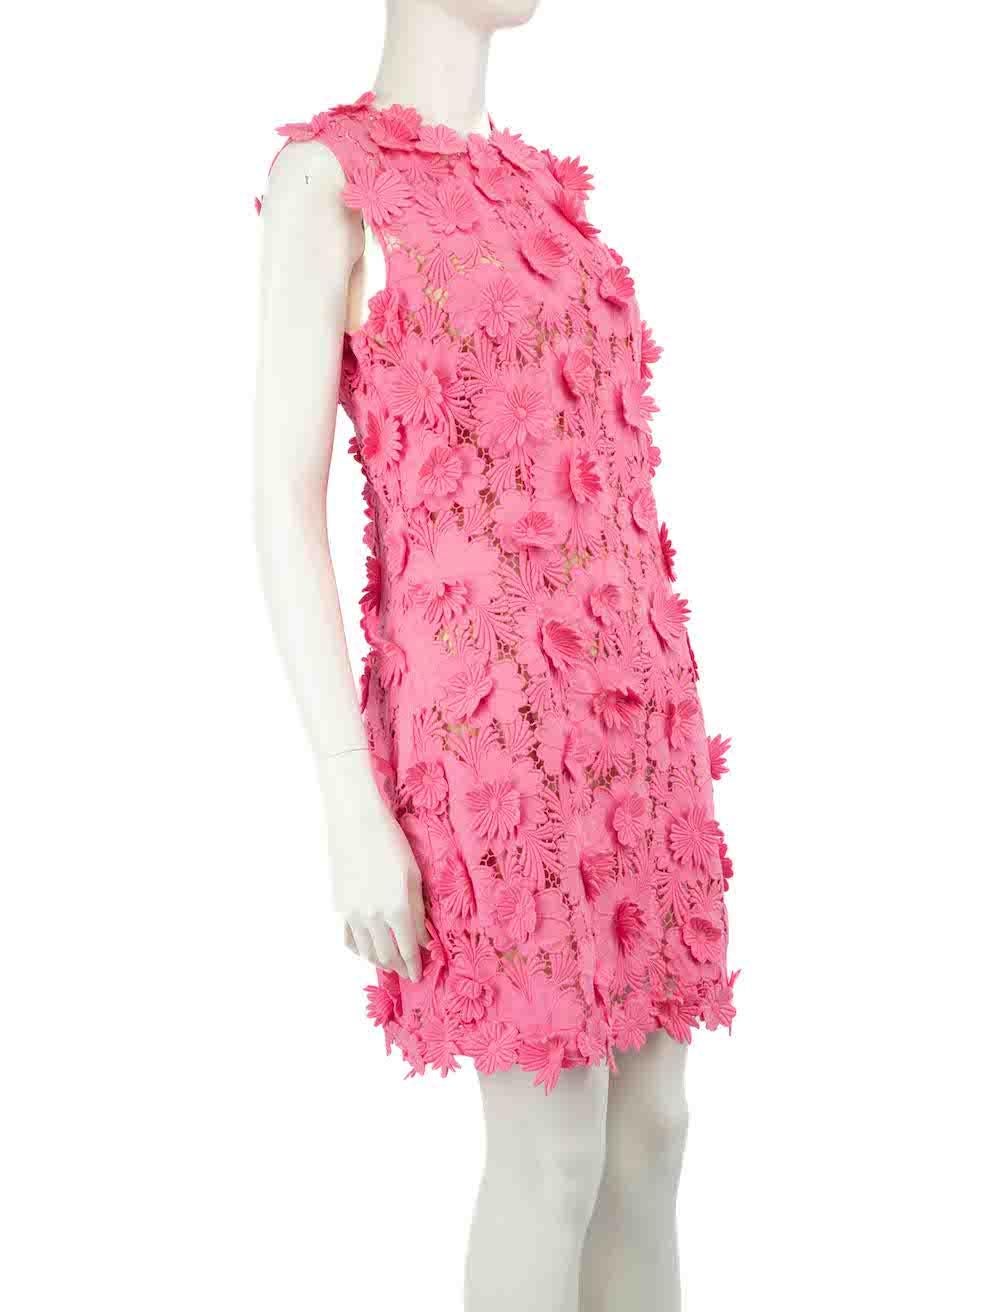 CONDITION is Never worn, with tags. No visible wear to dress is evident on this new Oscar de la Renta designer resale item.
 
 
 
 Details
 
 
 Pink
 
 Cotton
 
 Dress
 
 Floral appliqué guipure lace
 
 Mini
 
 Sleeveless
 
 Round neck
 
 Back hook,